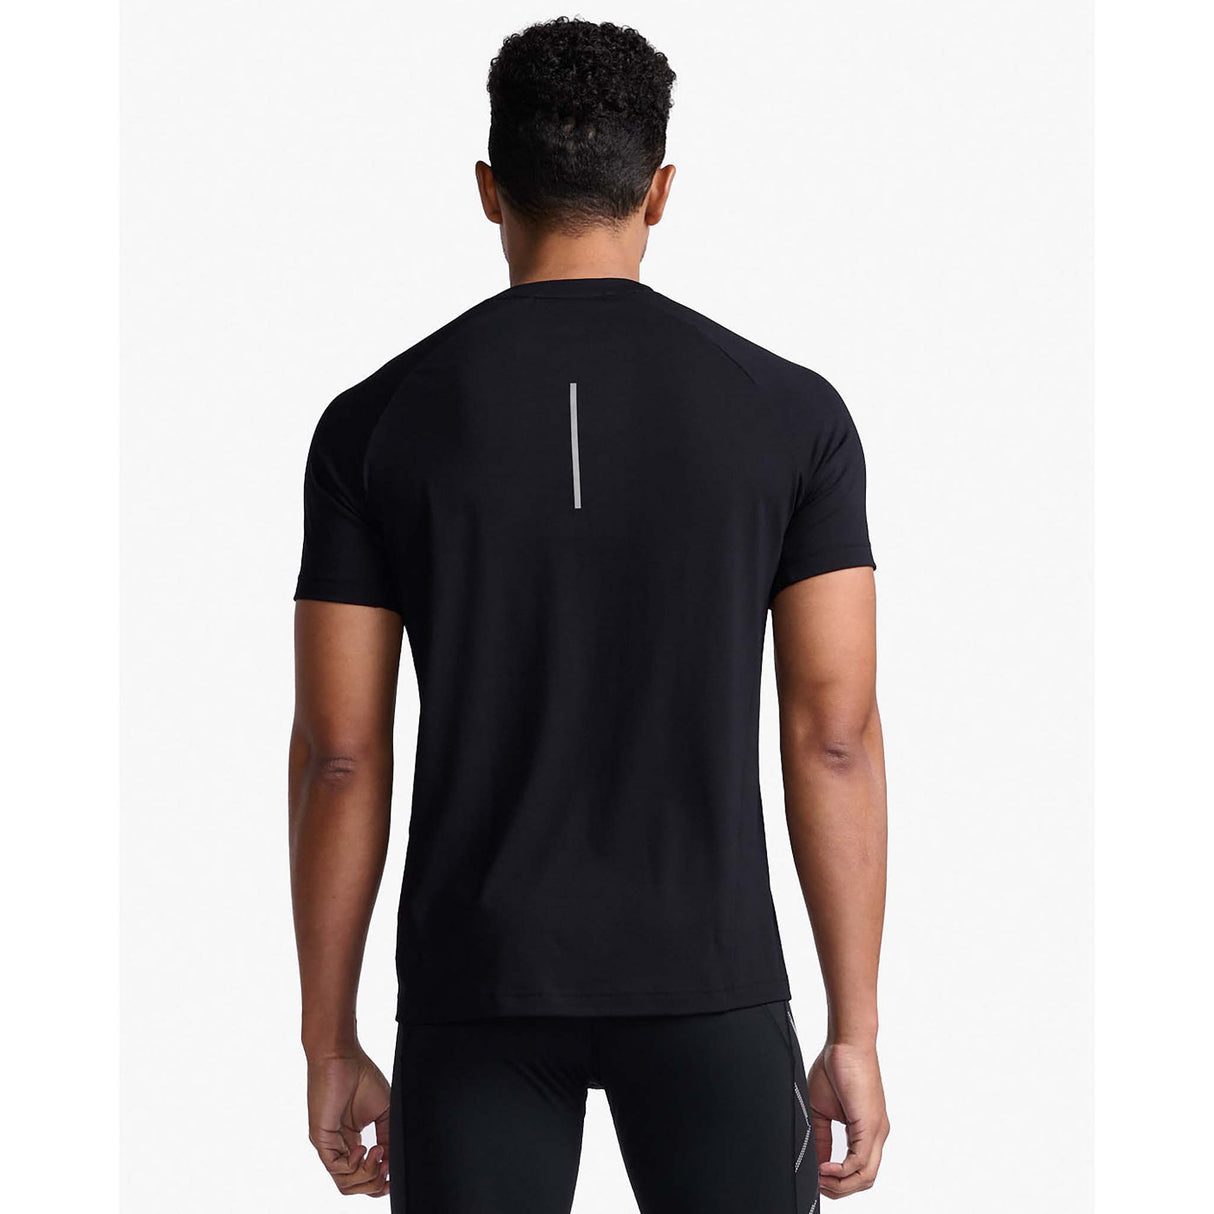 2XU Ignition Base Layer Tee noir homme dos